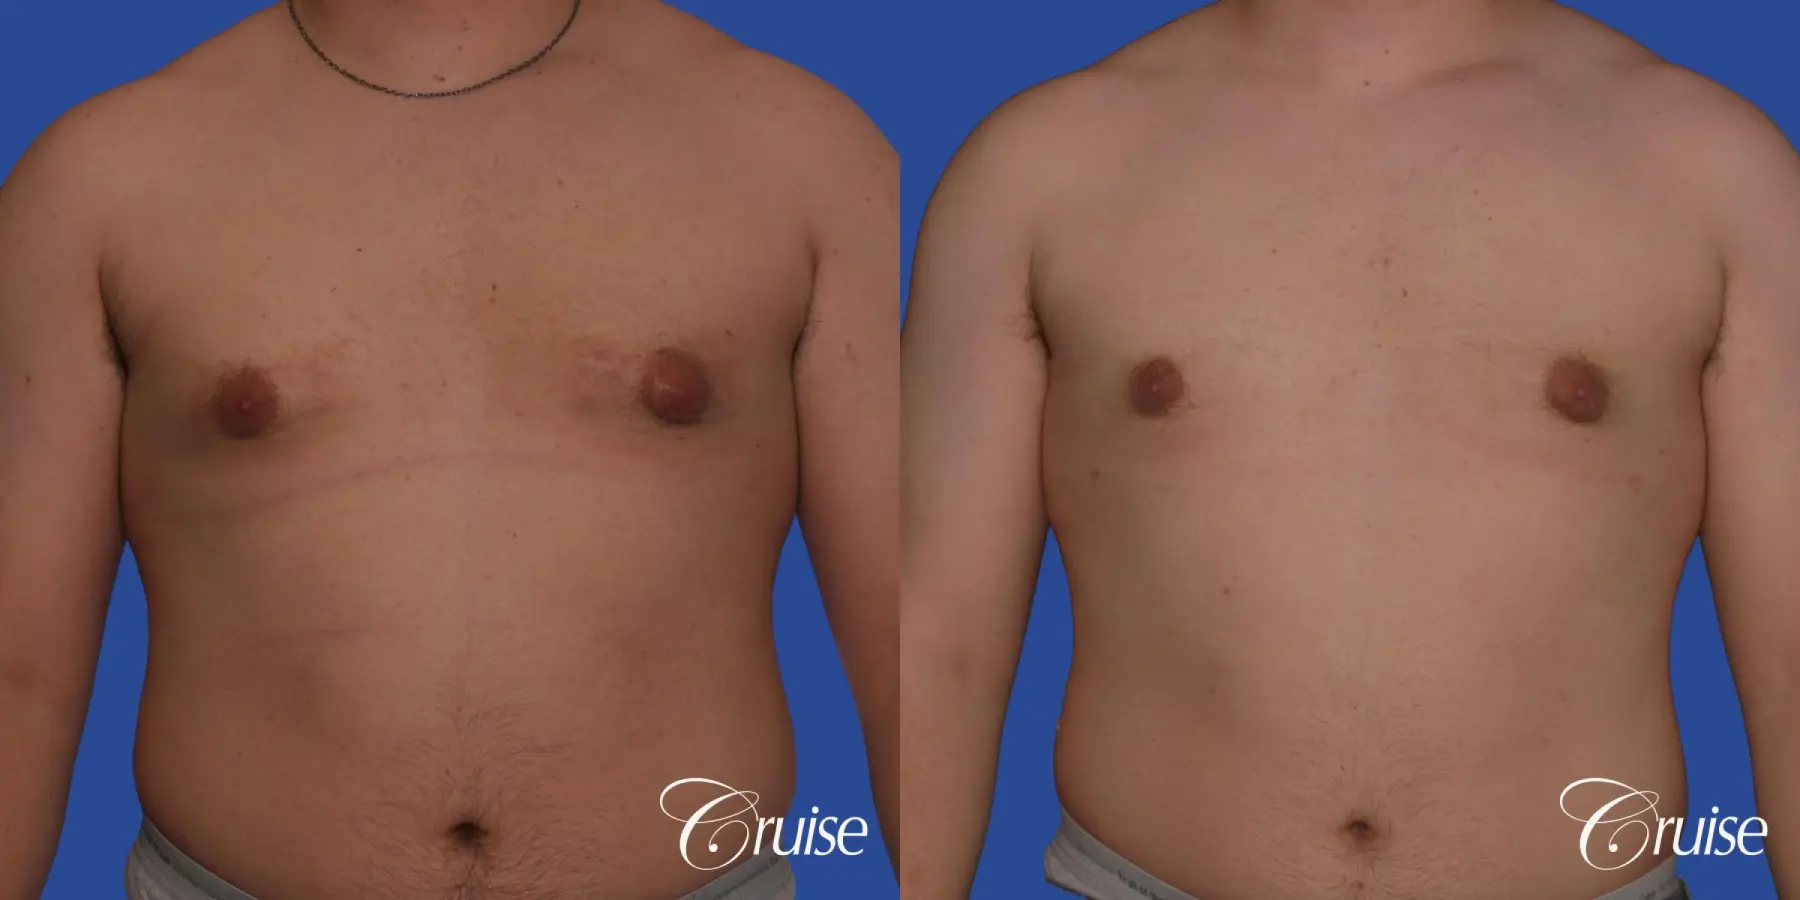 best scars for moderate gynecomastia - Before and After 1